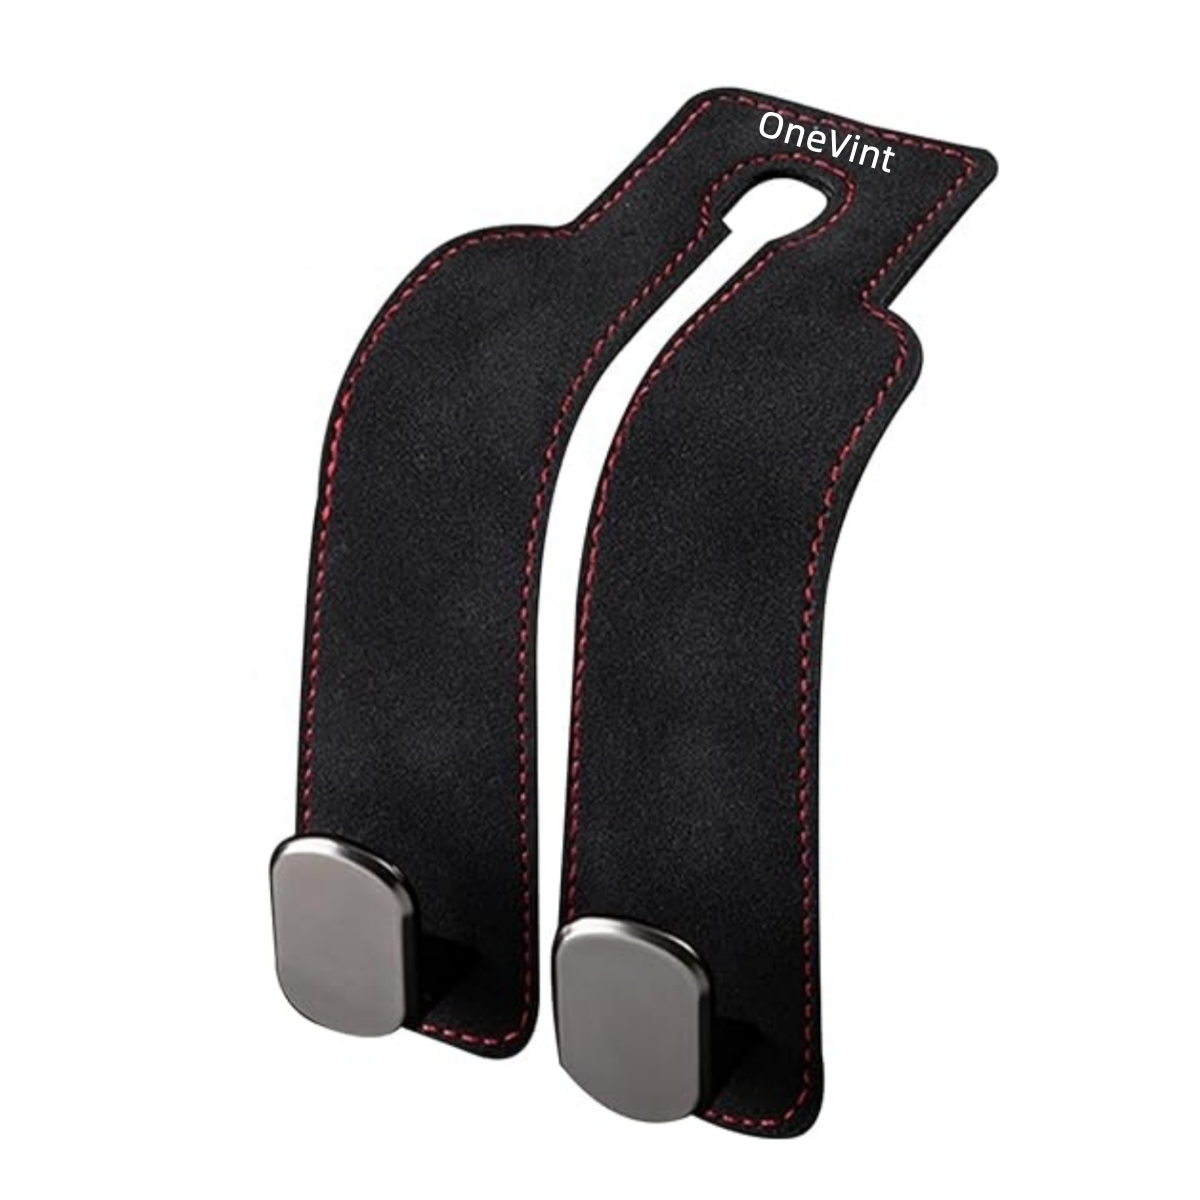 OneVint Leather Headrest Hooks for Car Seats, 2 Pack